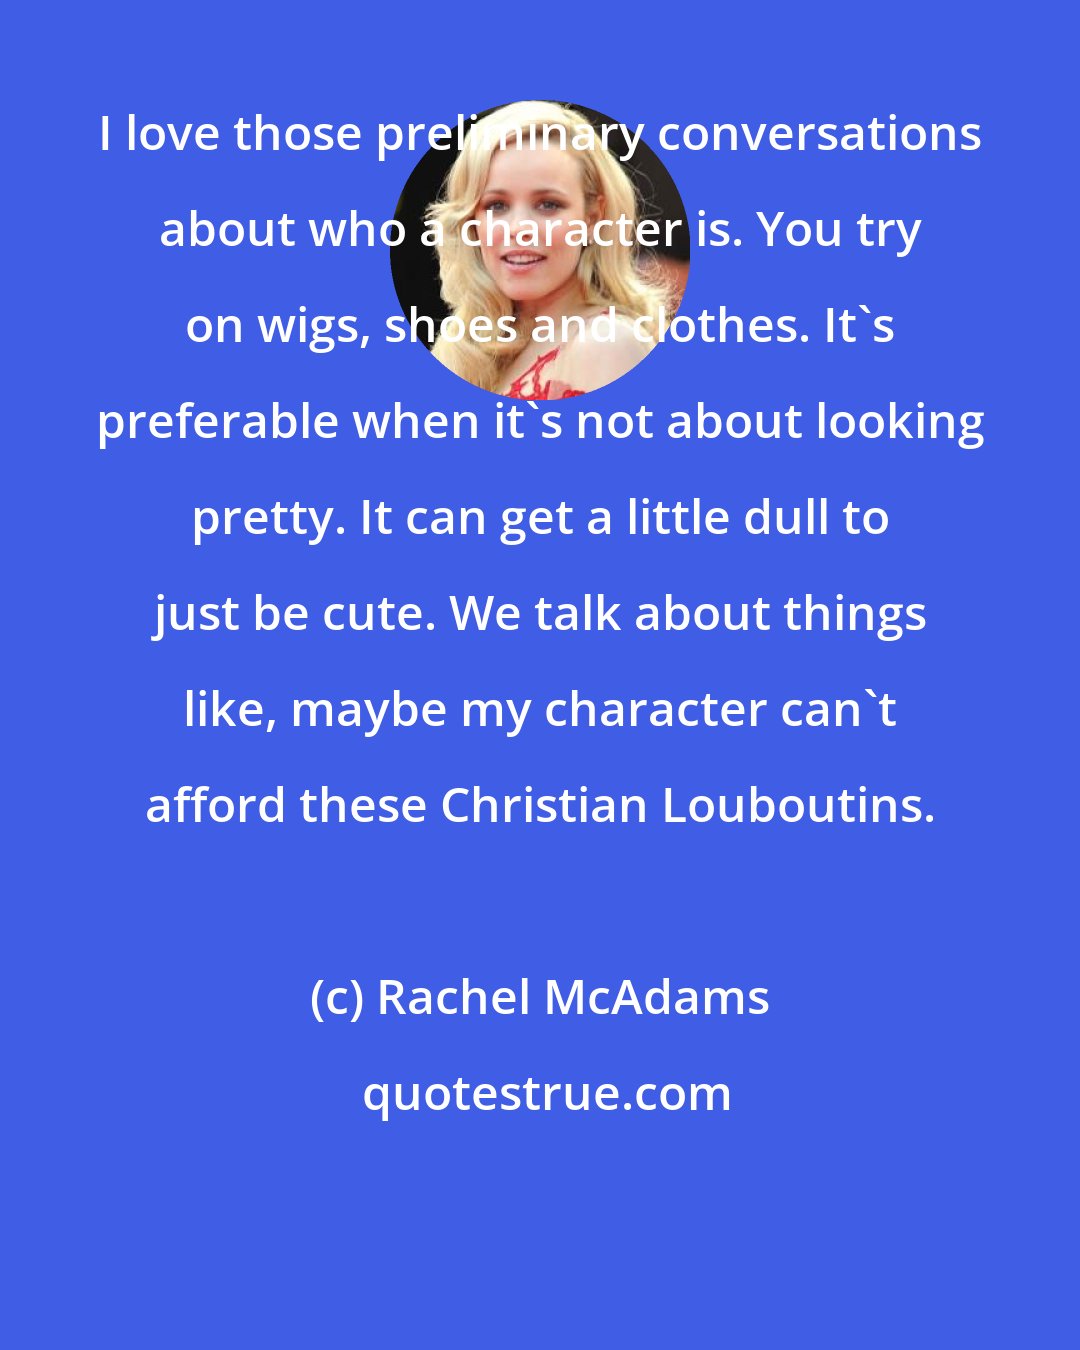 Rachel McAdams: I love those preliminary conversations about who a character is. You try on wigs, shoes and clothes. It's preferable when it's not about looking pretty. It can get a little dull to just be cute. We talk about things like, maybe my character can't afford these Christian Louboutins.